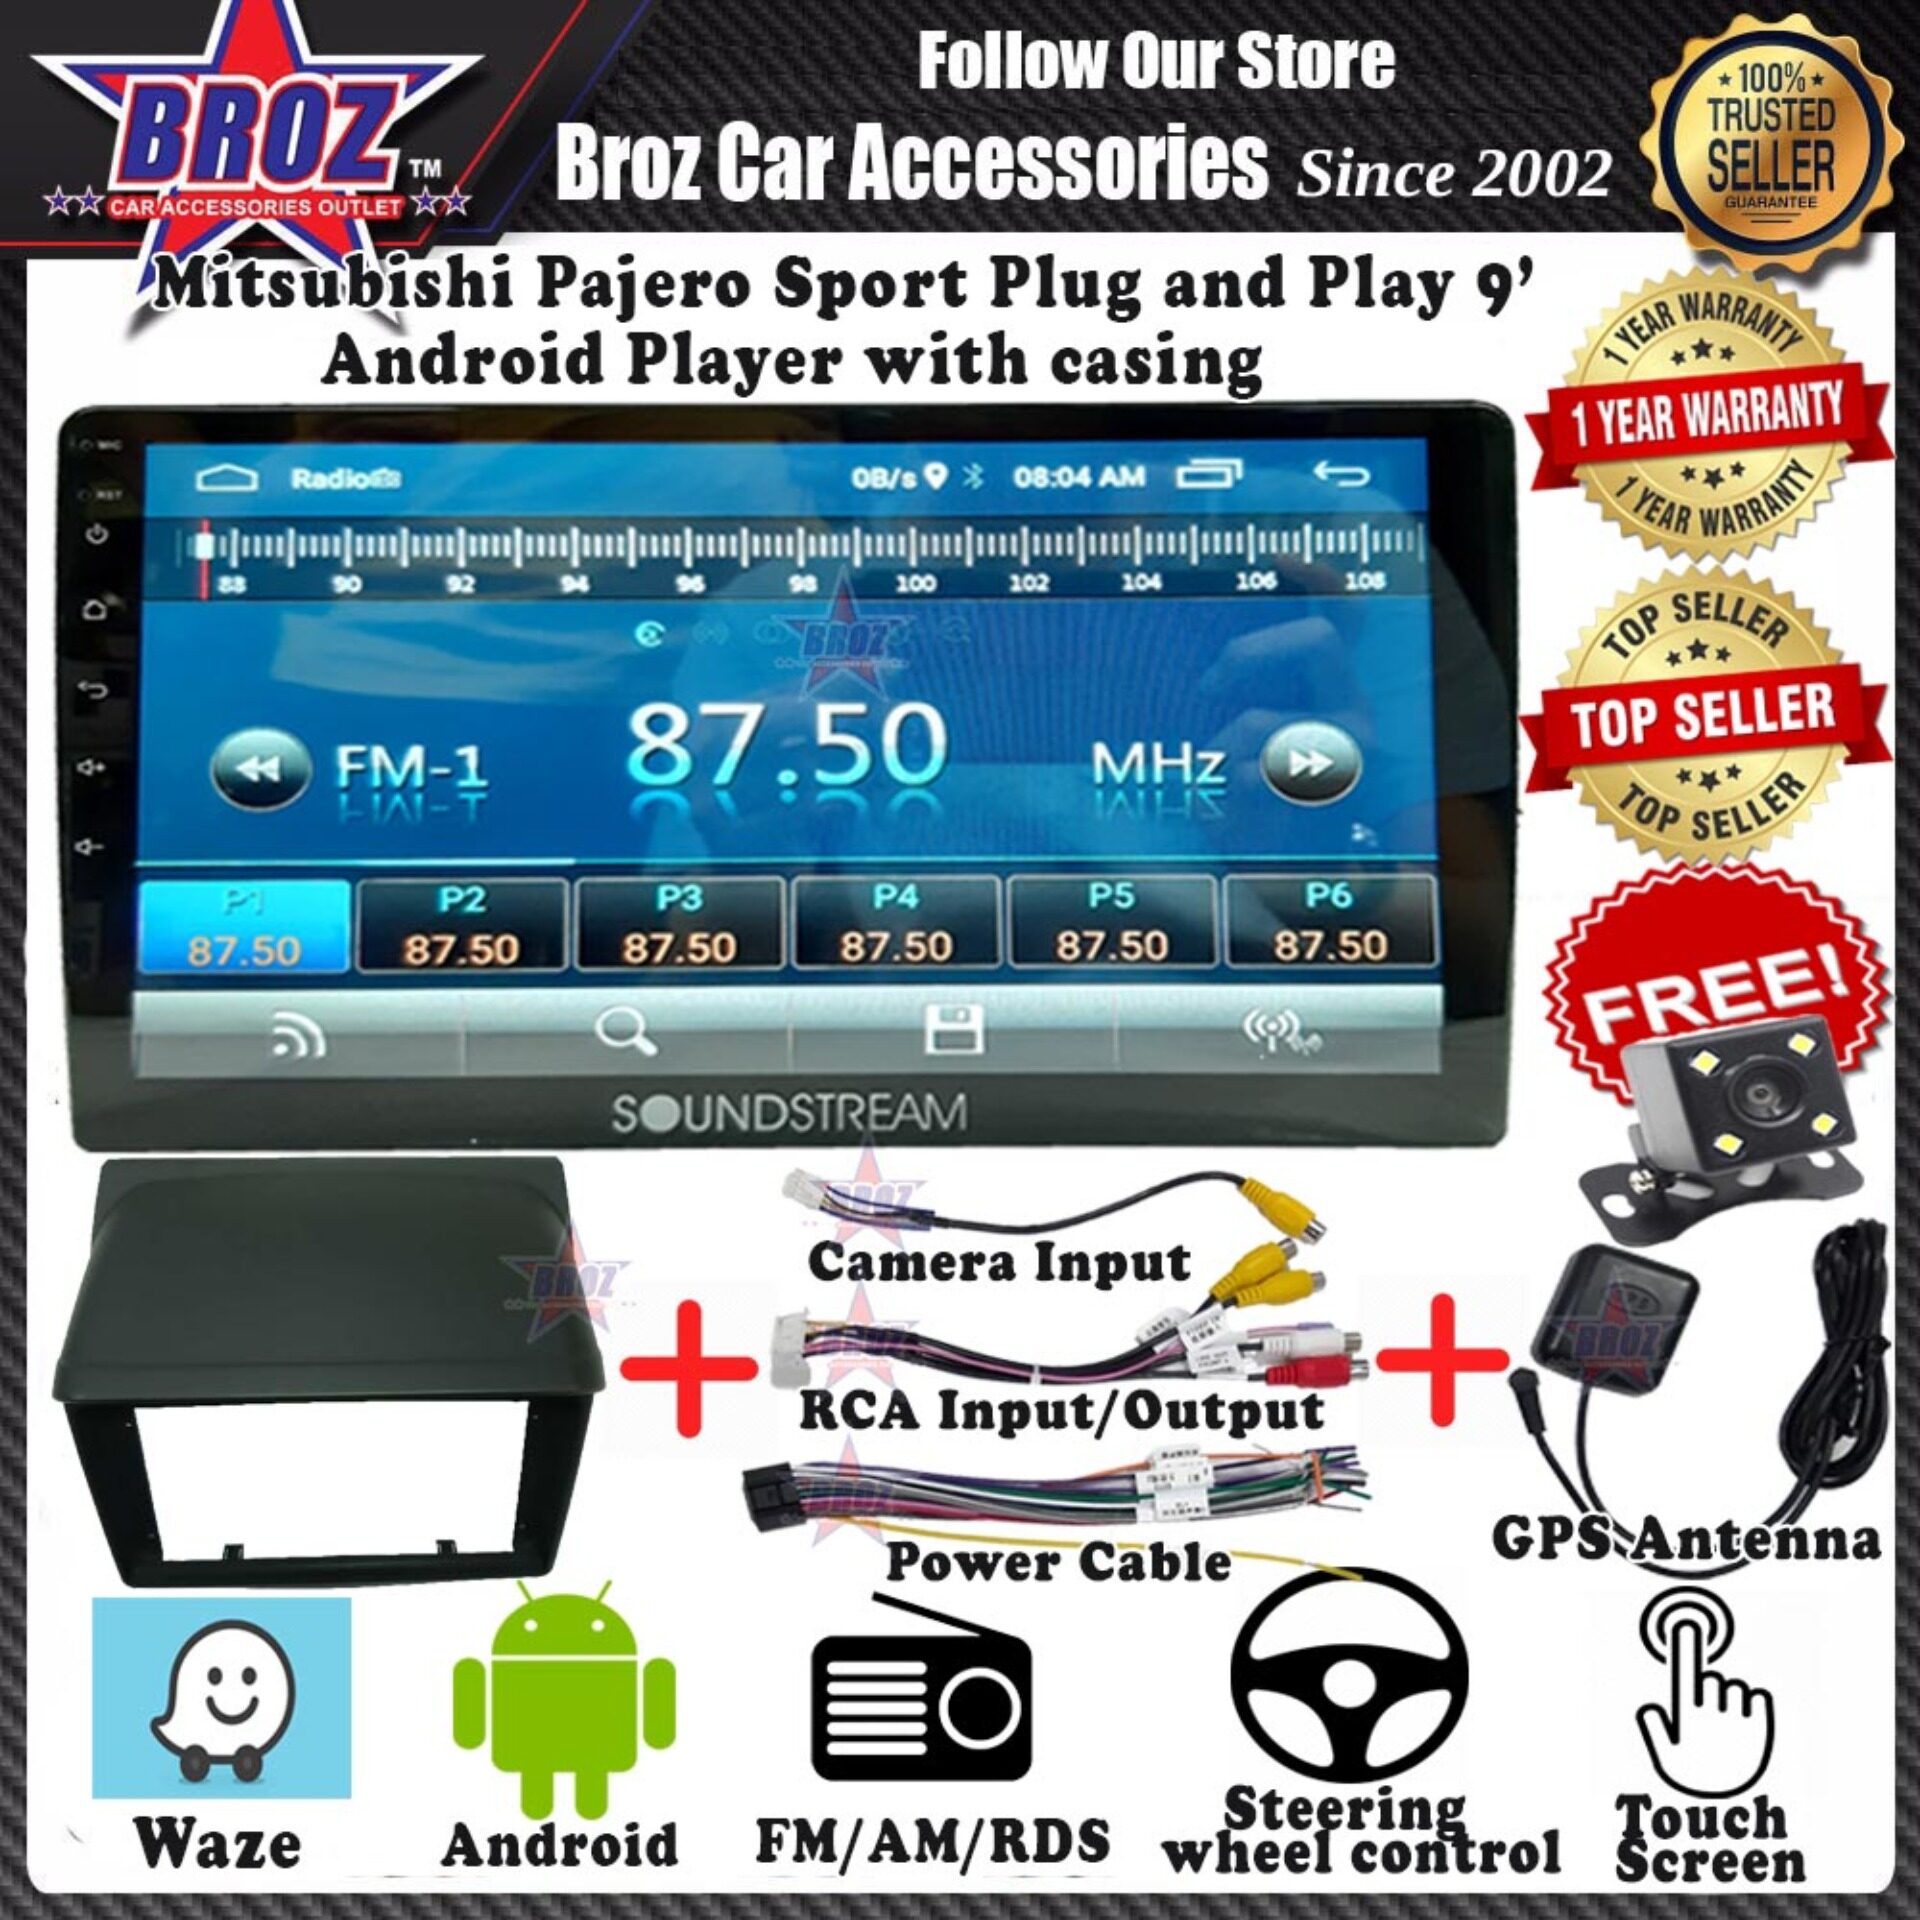 Mitsubishi Pajero Sport 9  Android Player 1GB + 16G 8.1 Universal Car Multimedia Head Unit Radio built in GPS Bluetooth WIFI USB AUX Touch Screen + Camera